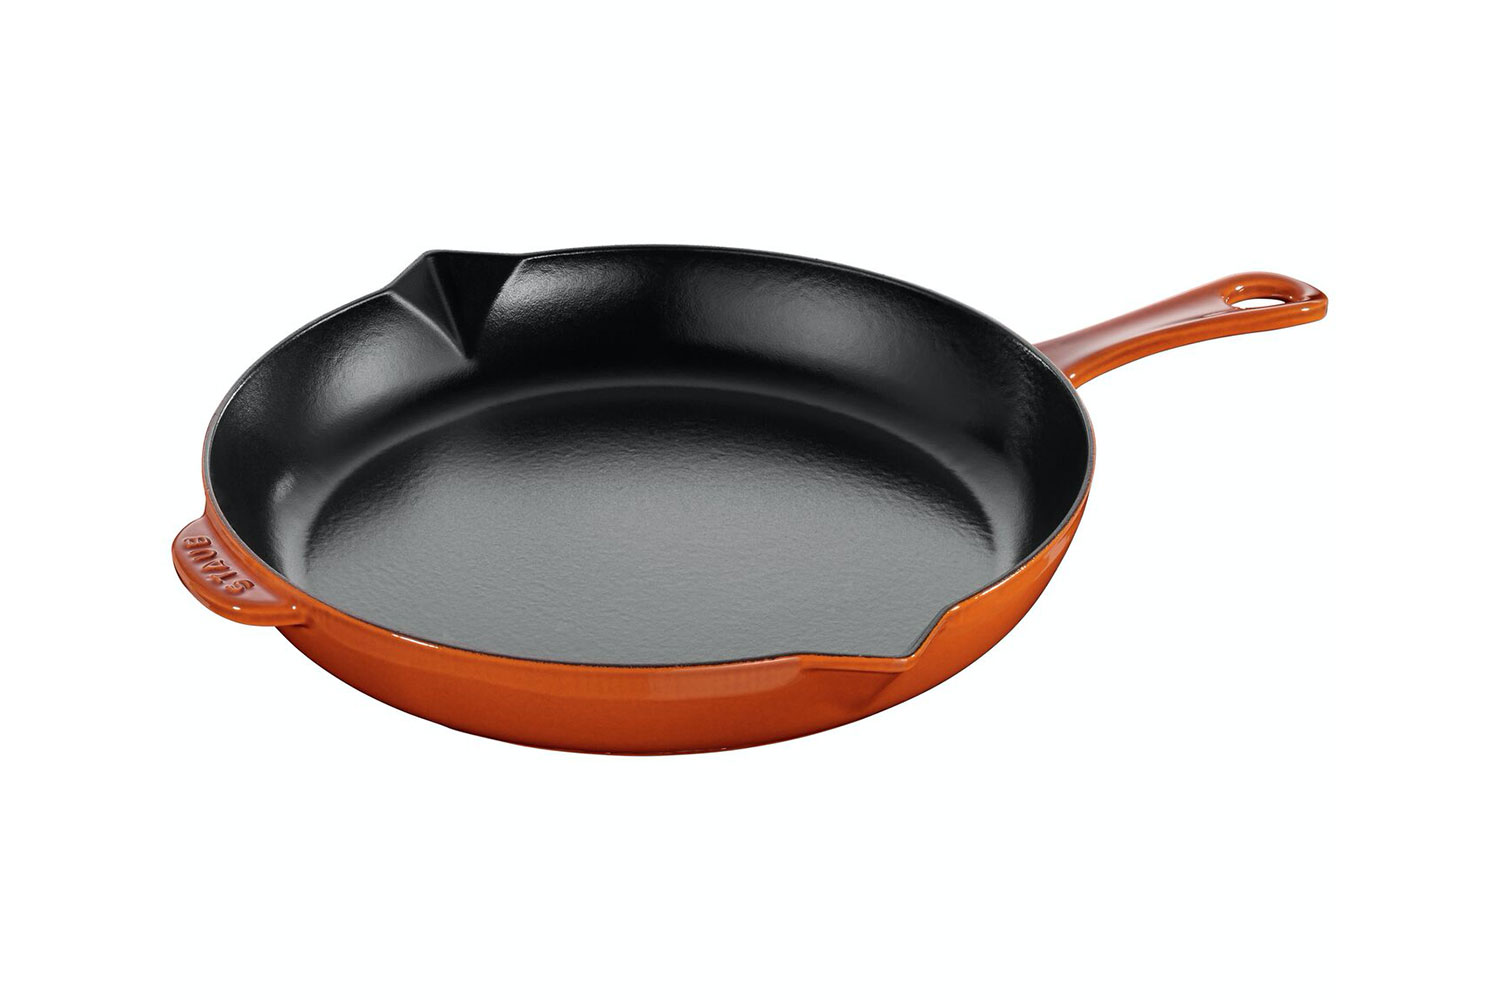 Our 12-inch skillet is officially - Stargazer Cast Iron